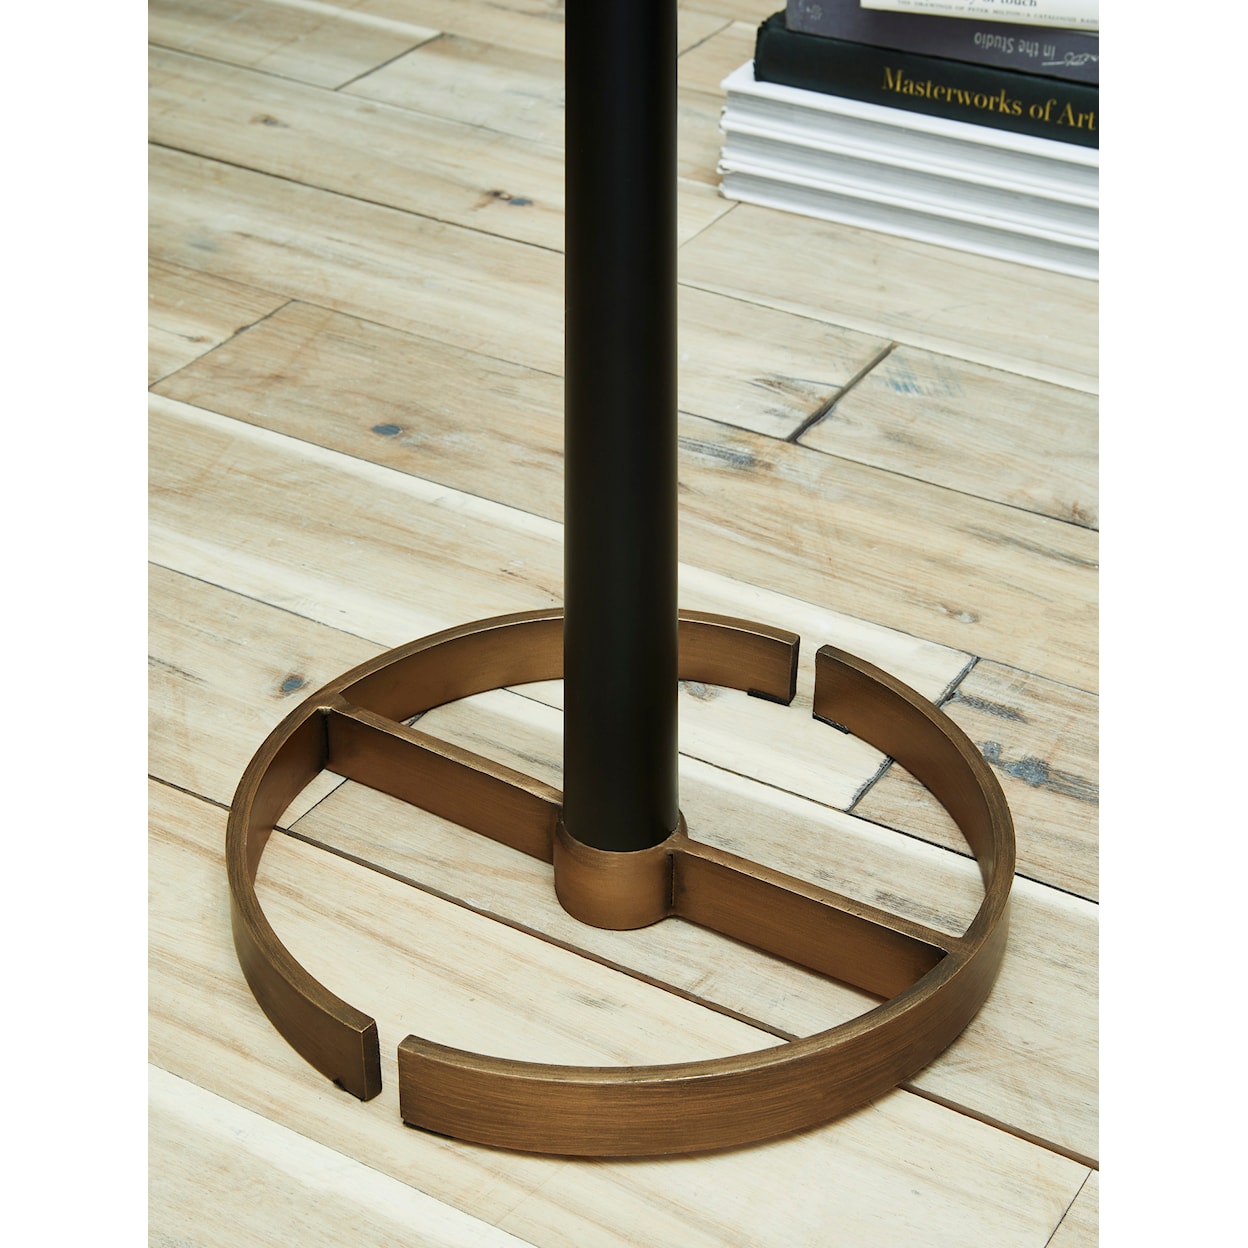 Ashley Furniture Signature Design Lamps - Contemporary Amadell Floor Lamp